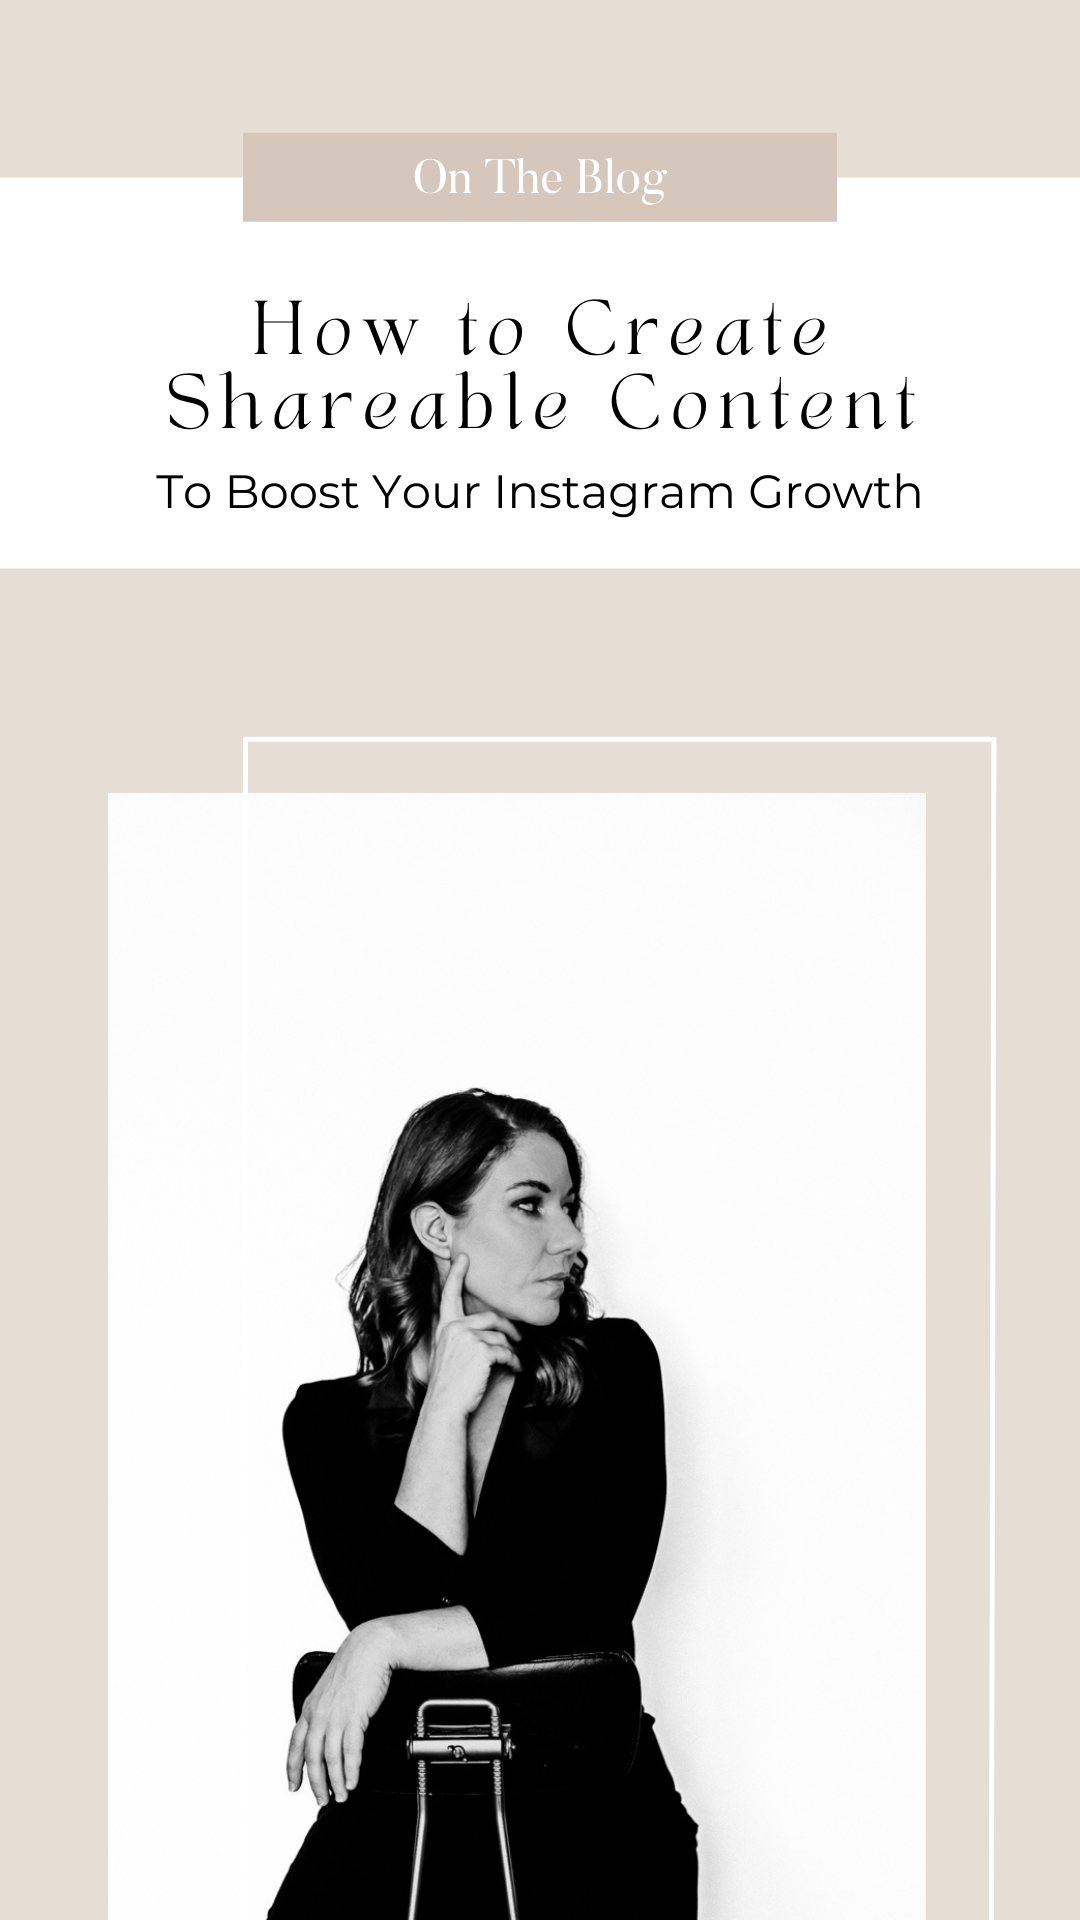 How to Create Shareable Content to Boost Instagram Growth